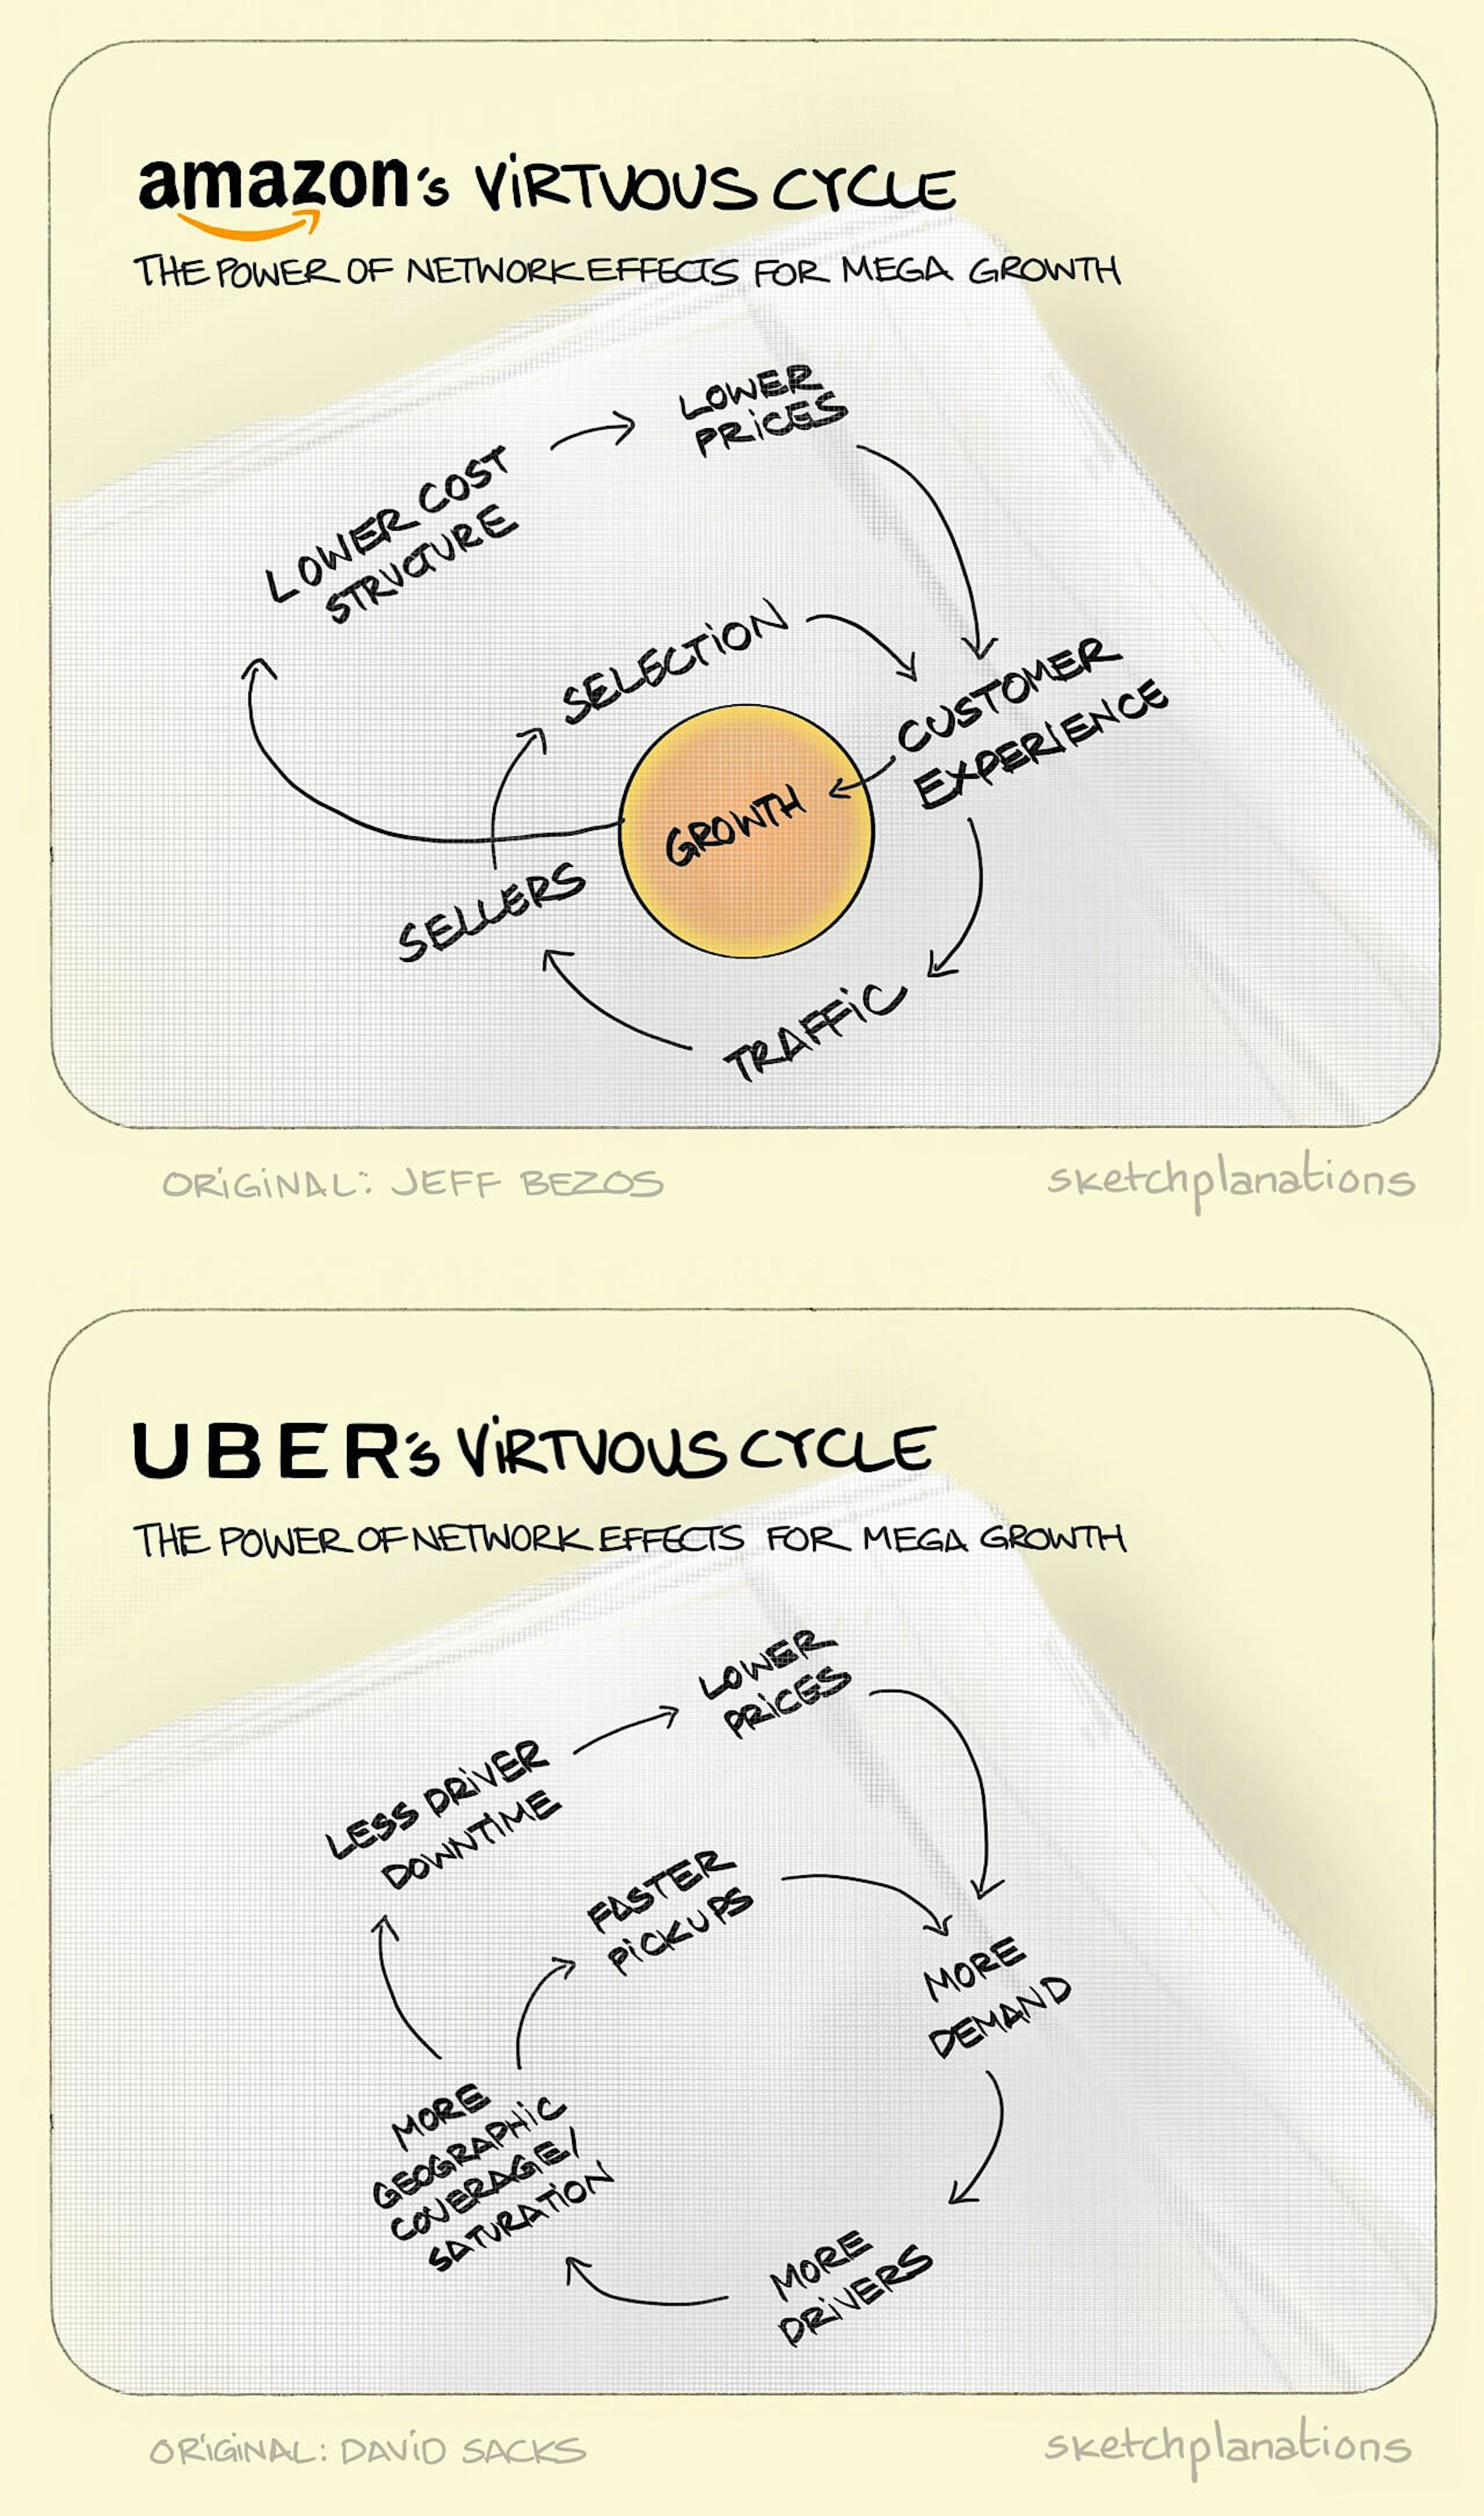 The "virtuous cycle" of Amazon and Uber illustration: closed loop flow diagrams demonstrate the effect of growth on factors like demand, price and service for Amazon and Uber. 